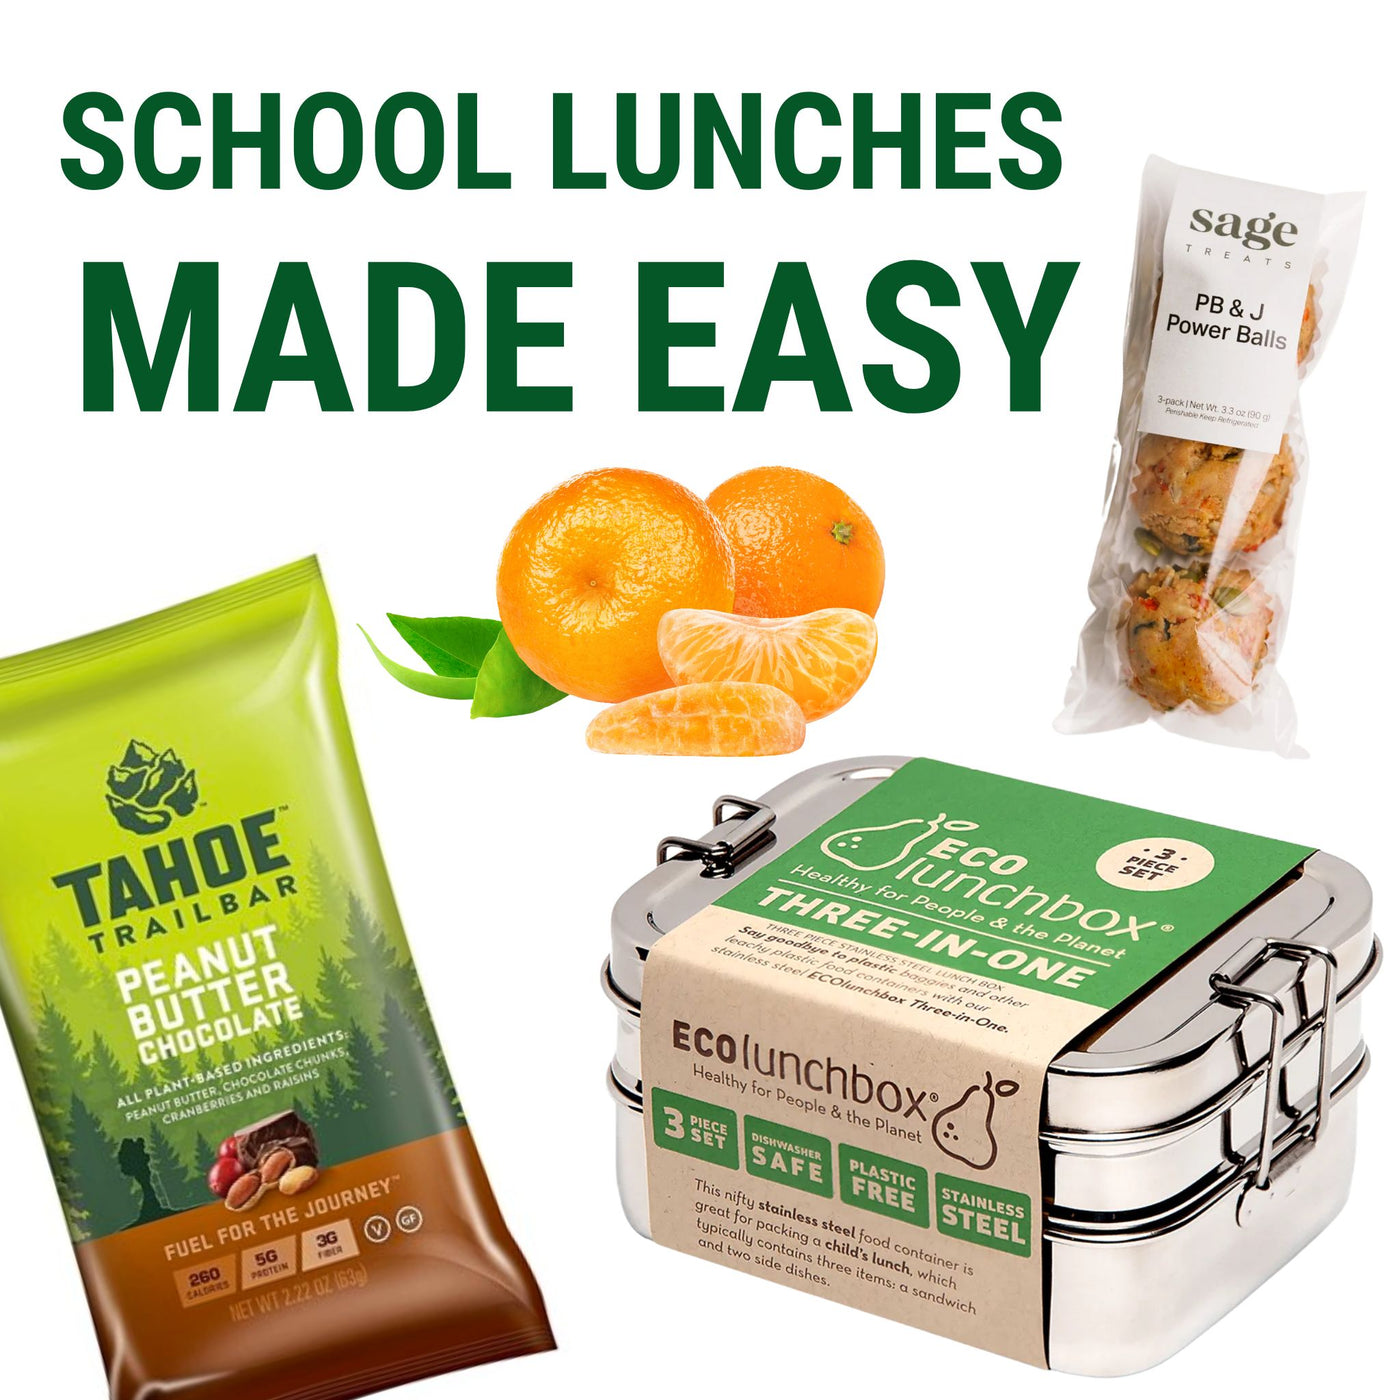 School Lunches Made Easy